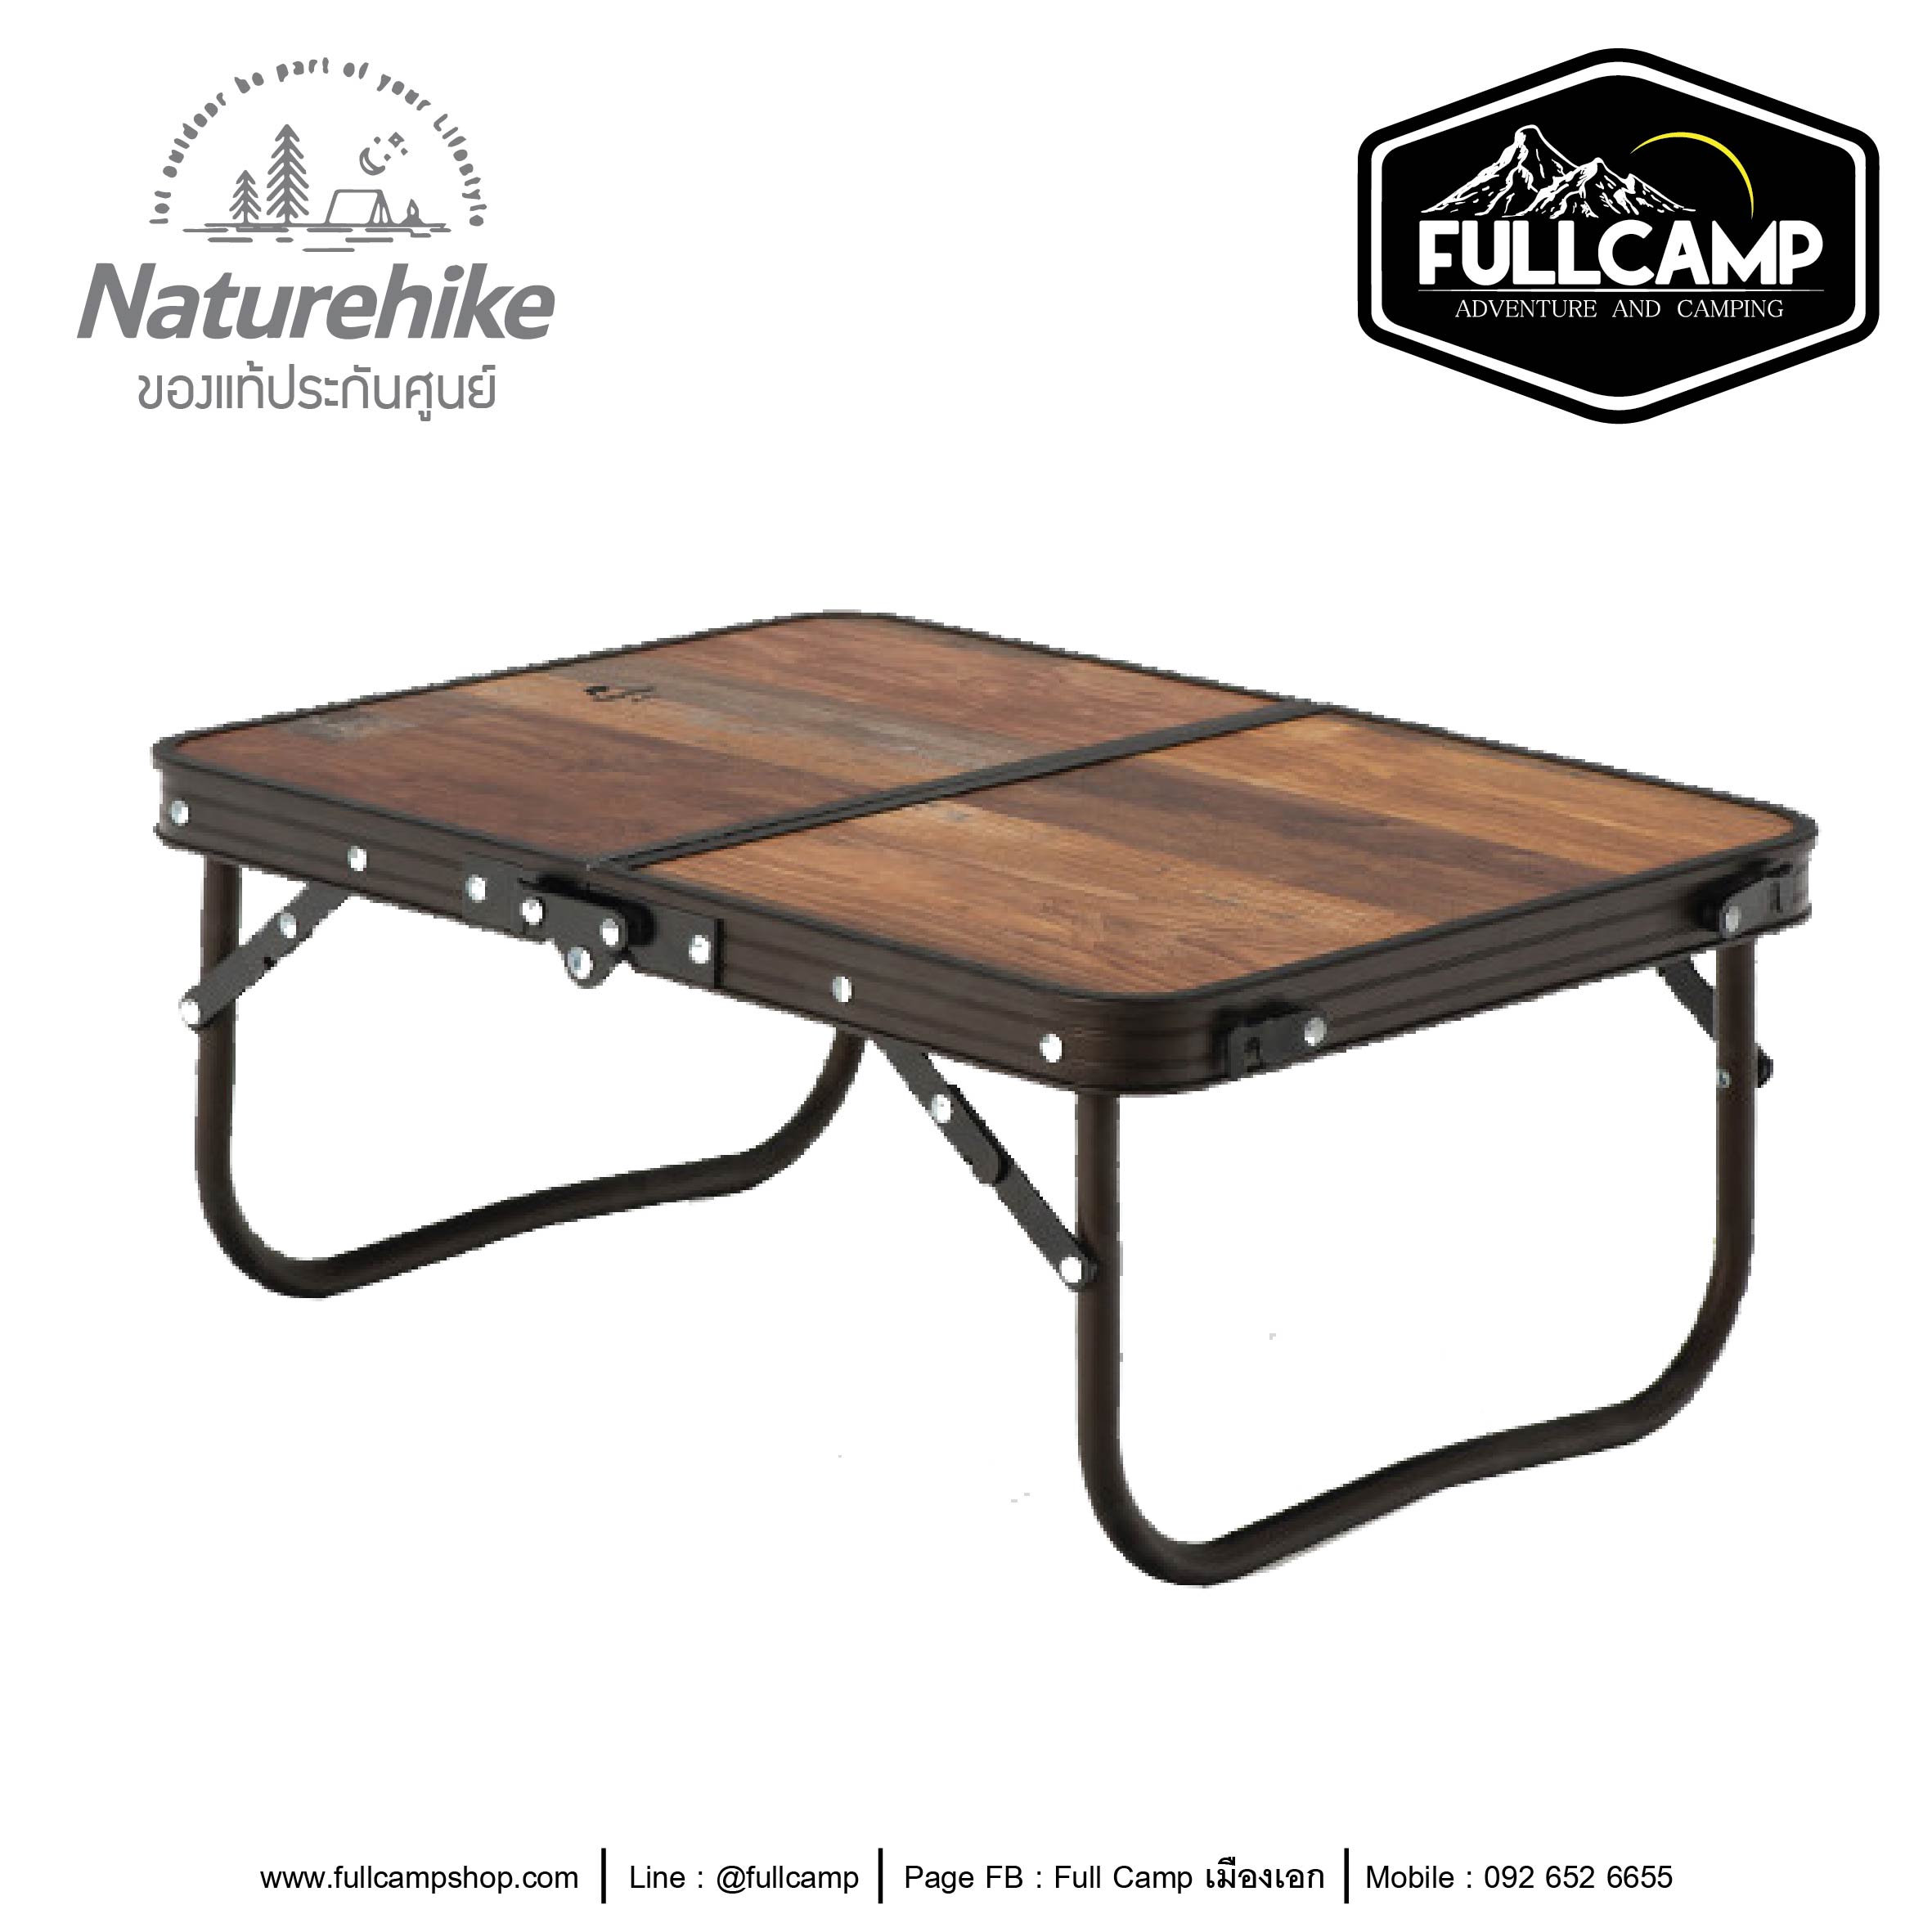 Naturehike MDF Outdoor Folding Table (S)